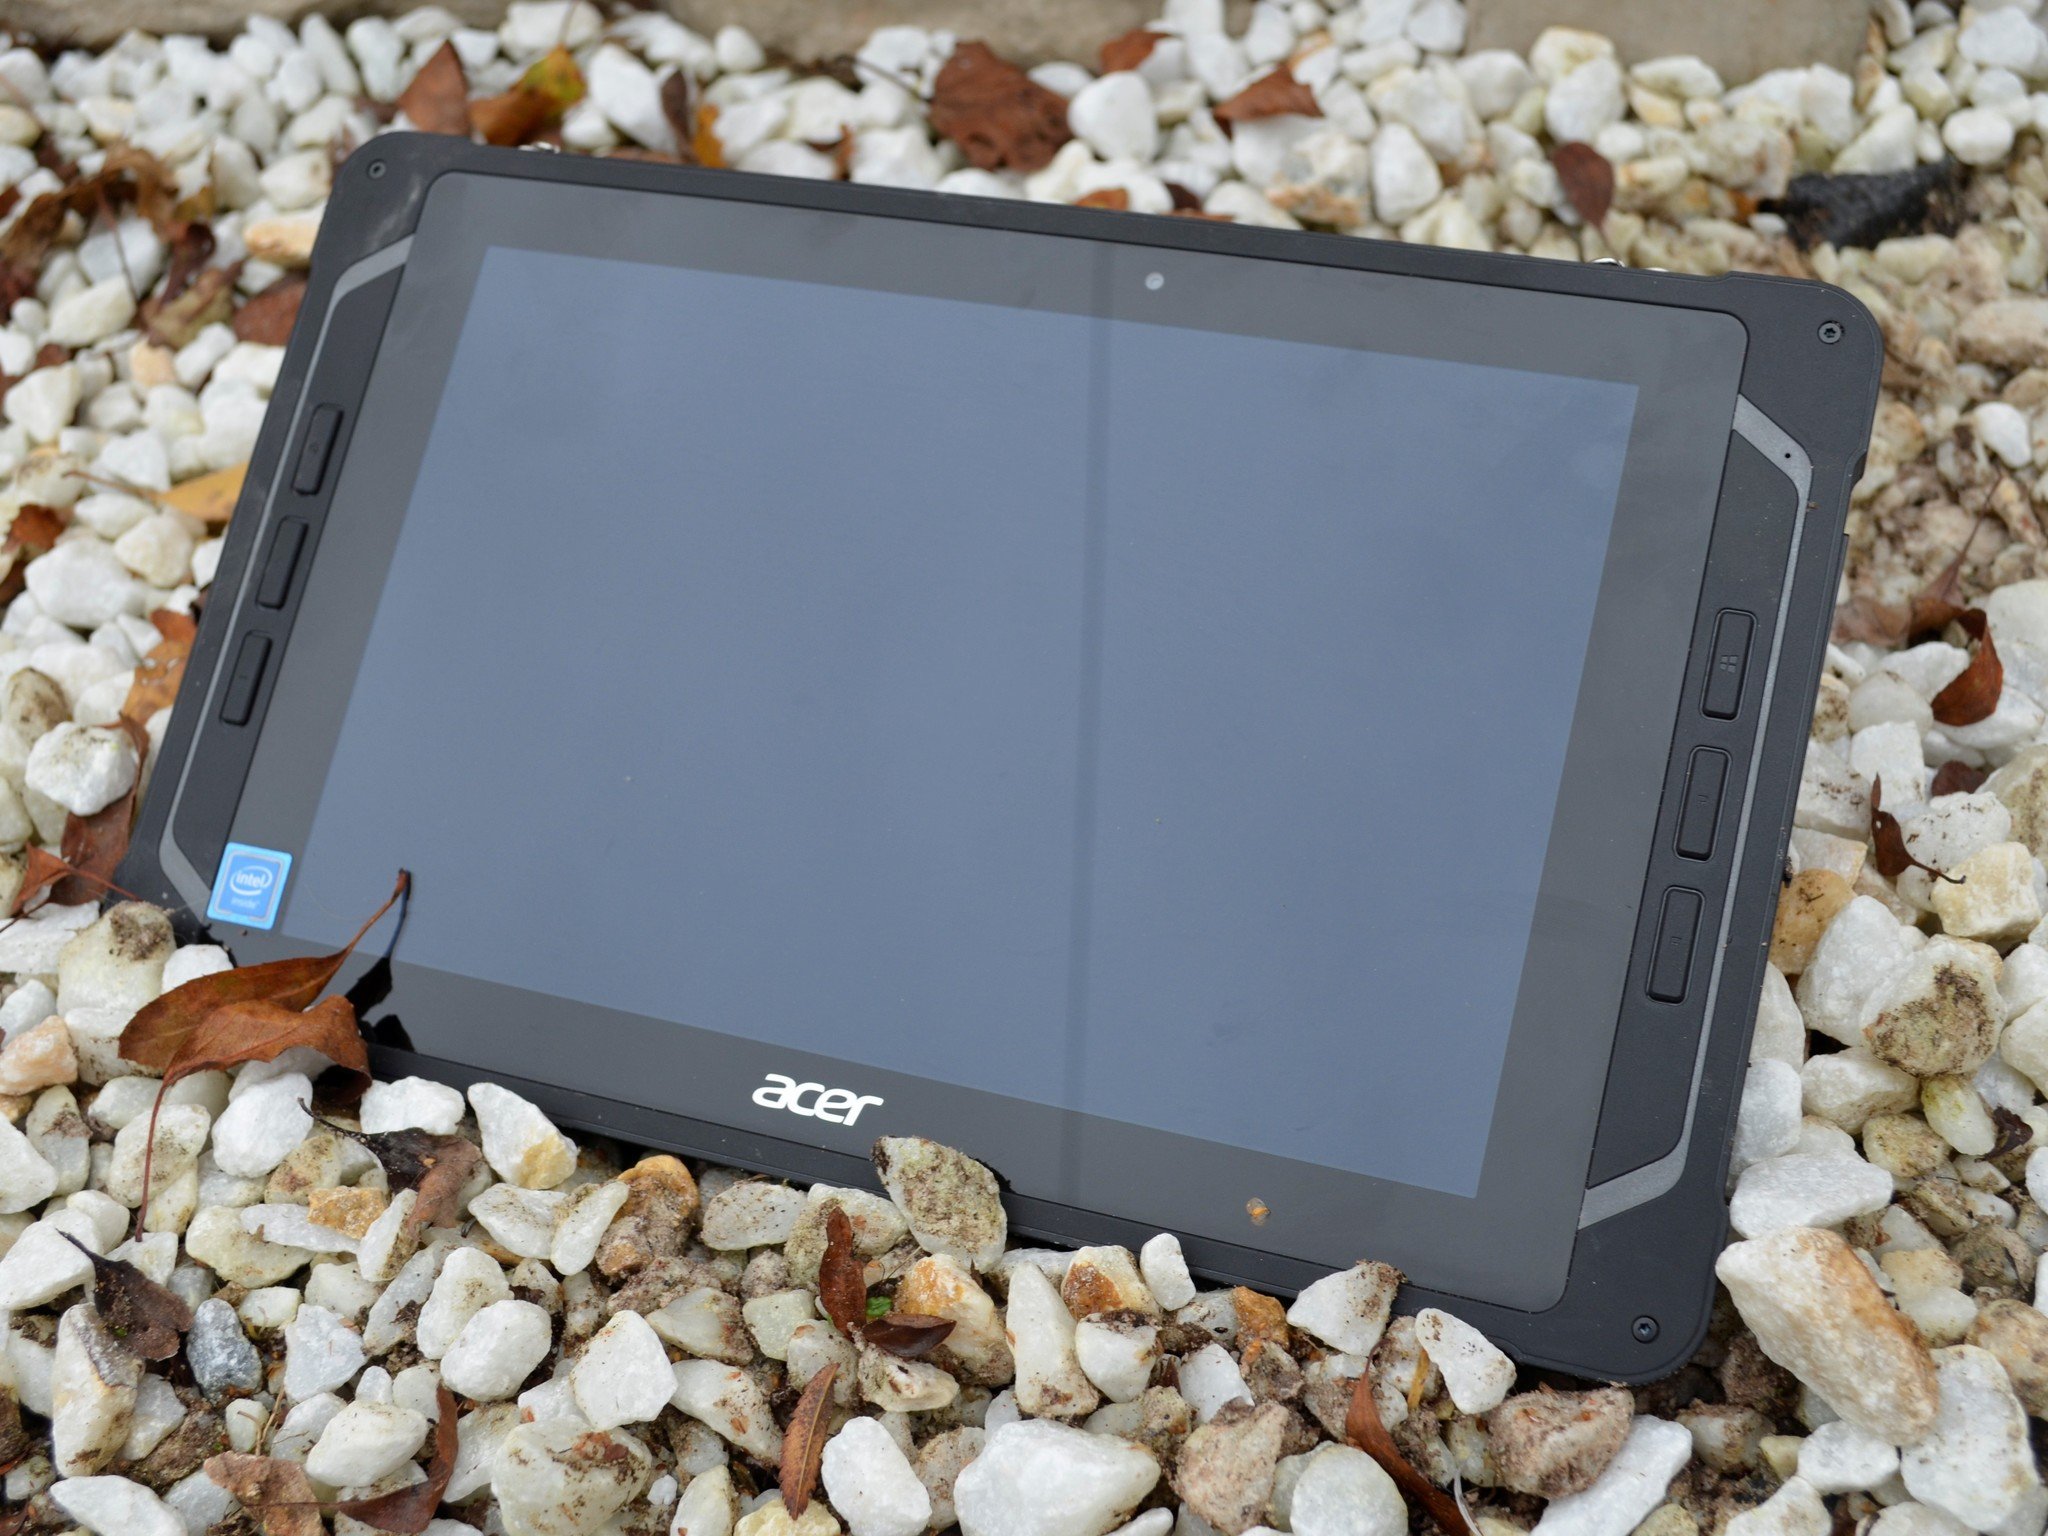 Acer Enduro T1 review: A rugged Windows tablet that's built for 